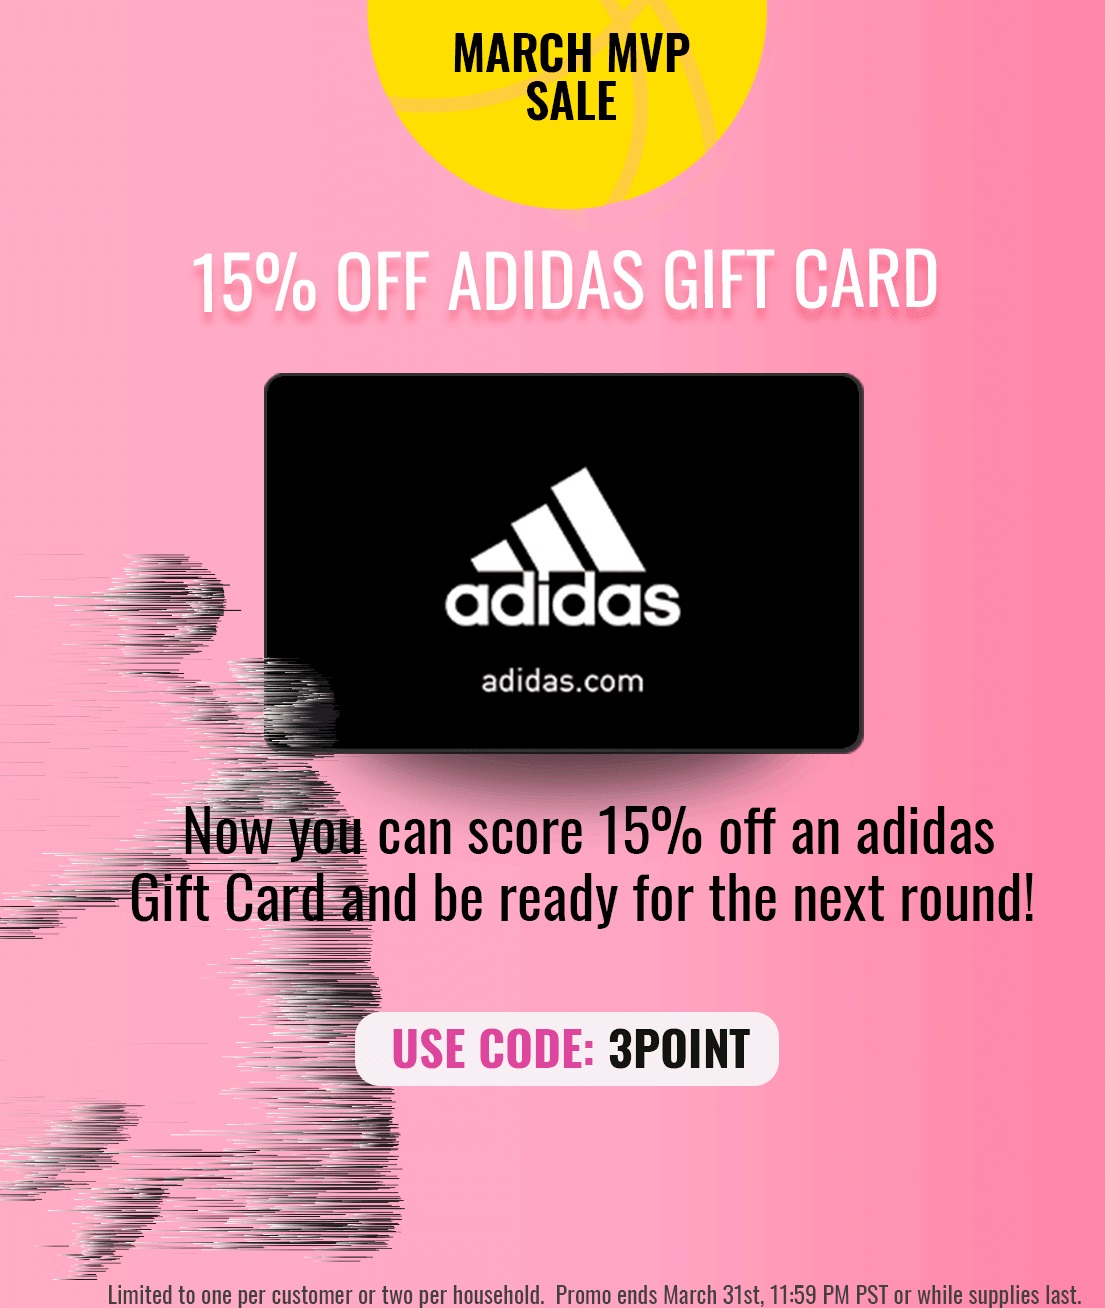 Expired Swych Save 15 On Adidas Gift Cards When Using Promo